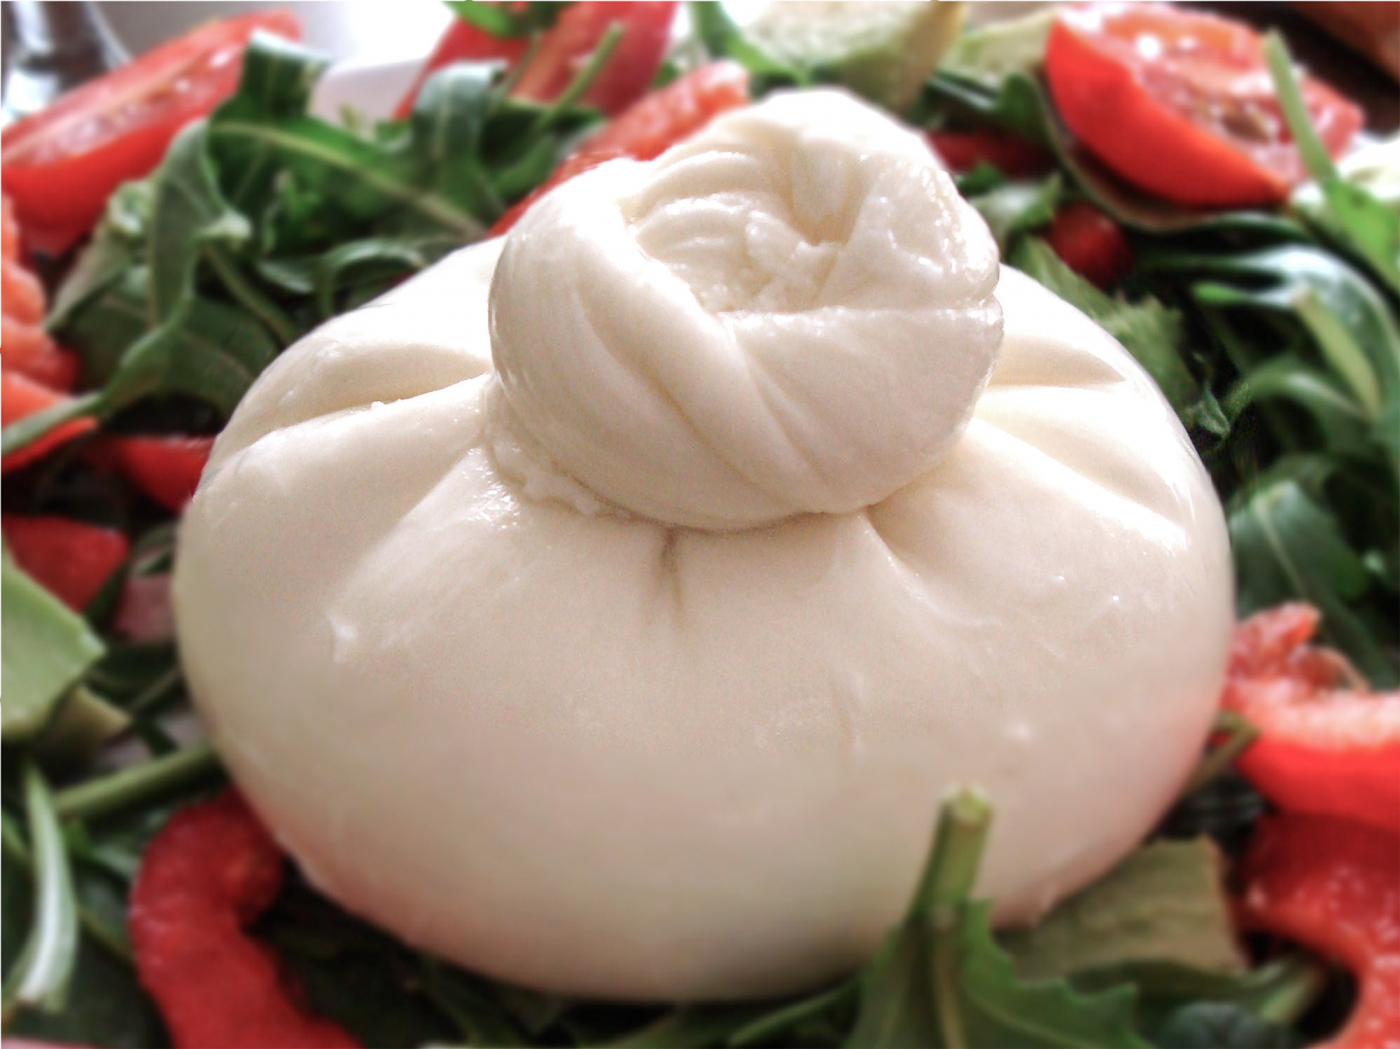 The best burrata in the world